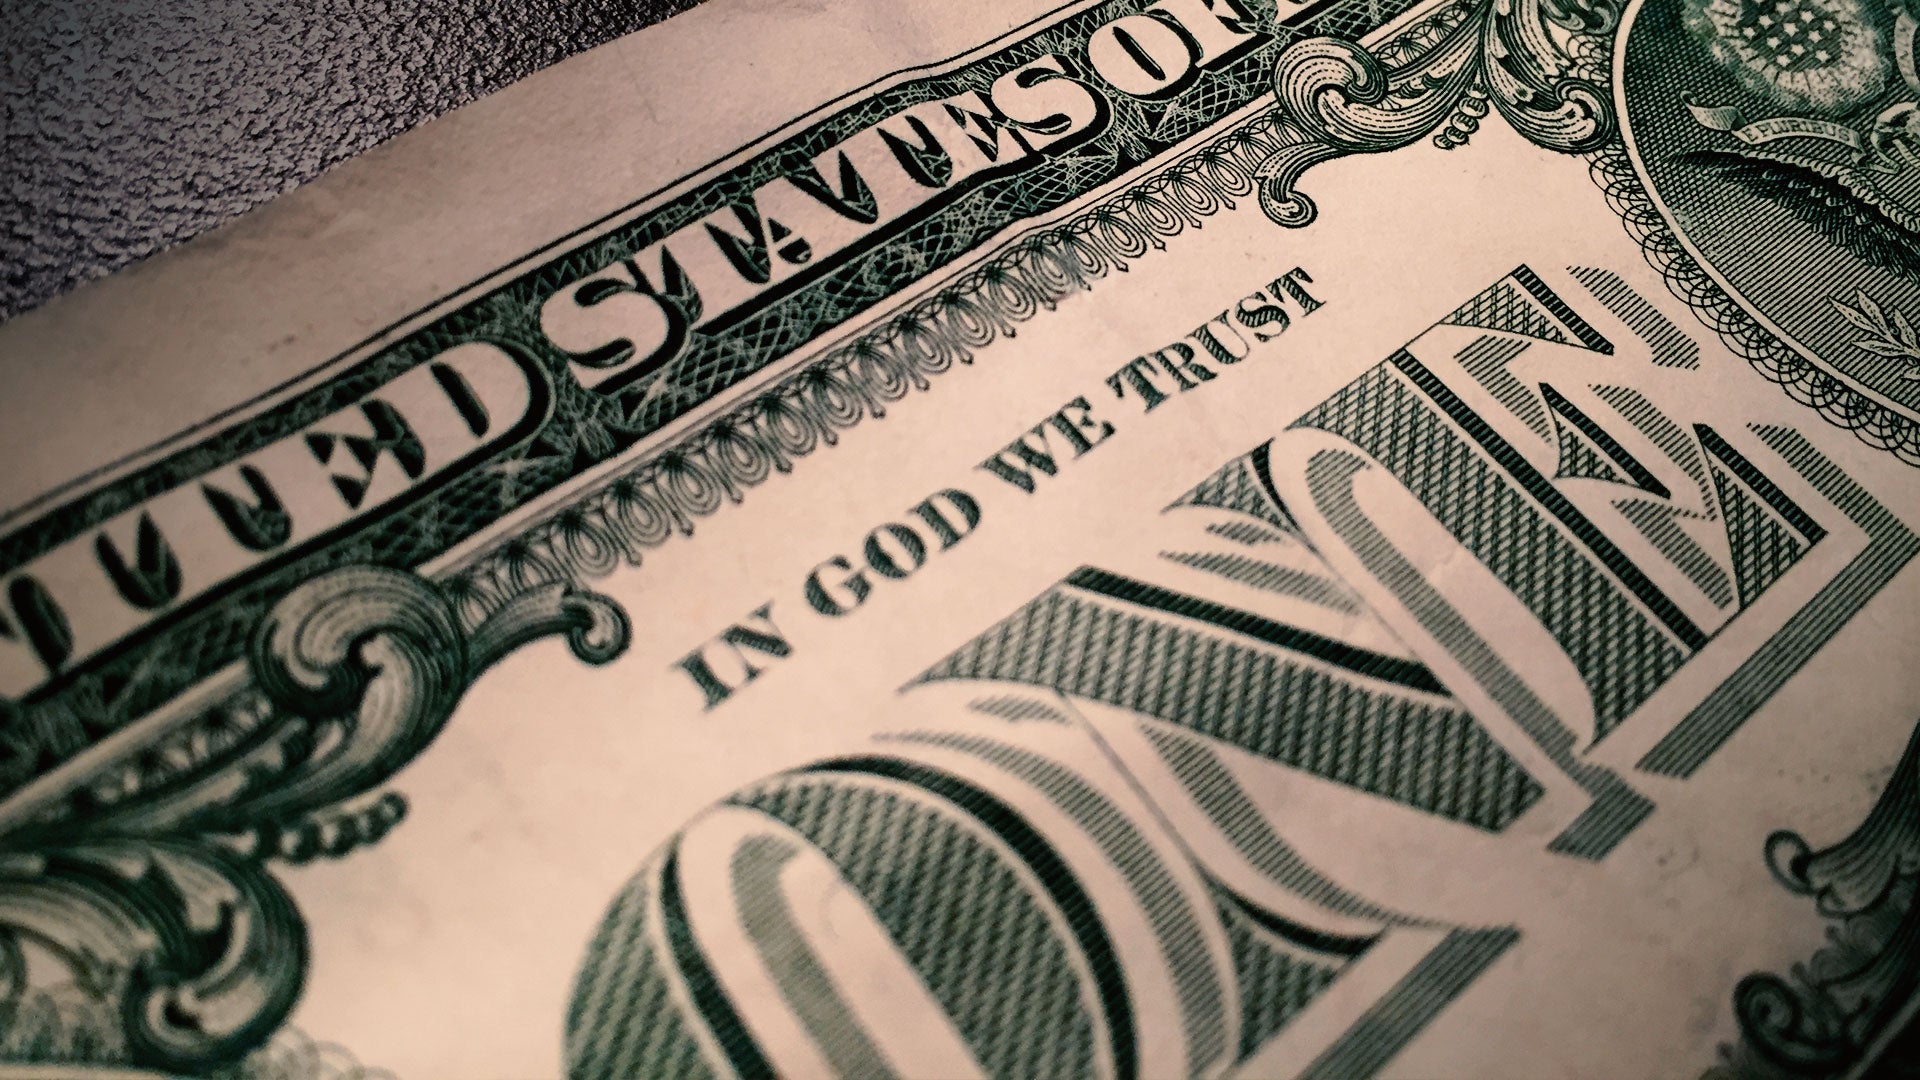 Dollars on top on god. In God we Trust доллар купюра. Купюра США “in God we Trust”. Надпись на долларе in God. Доллар Бог.